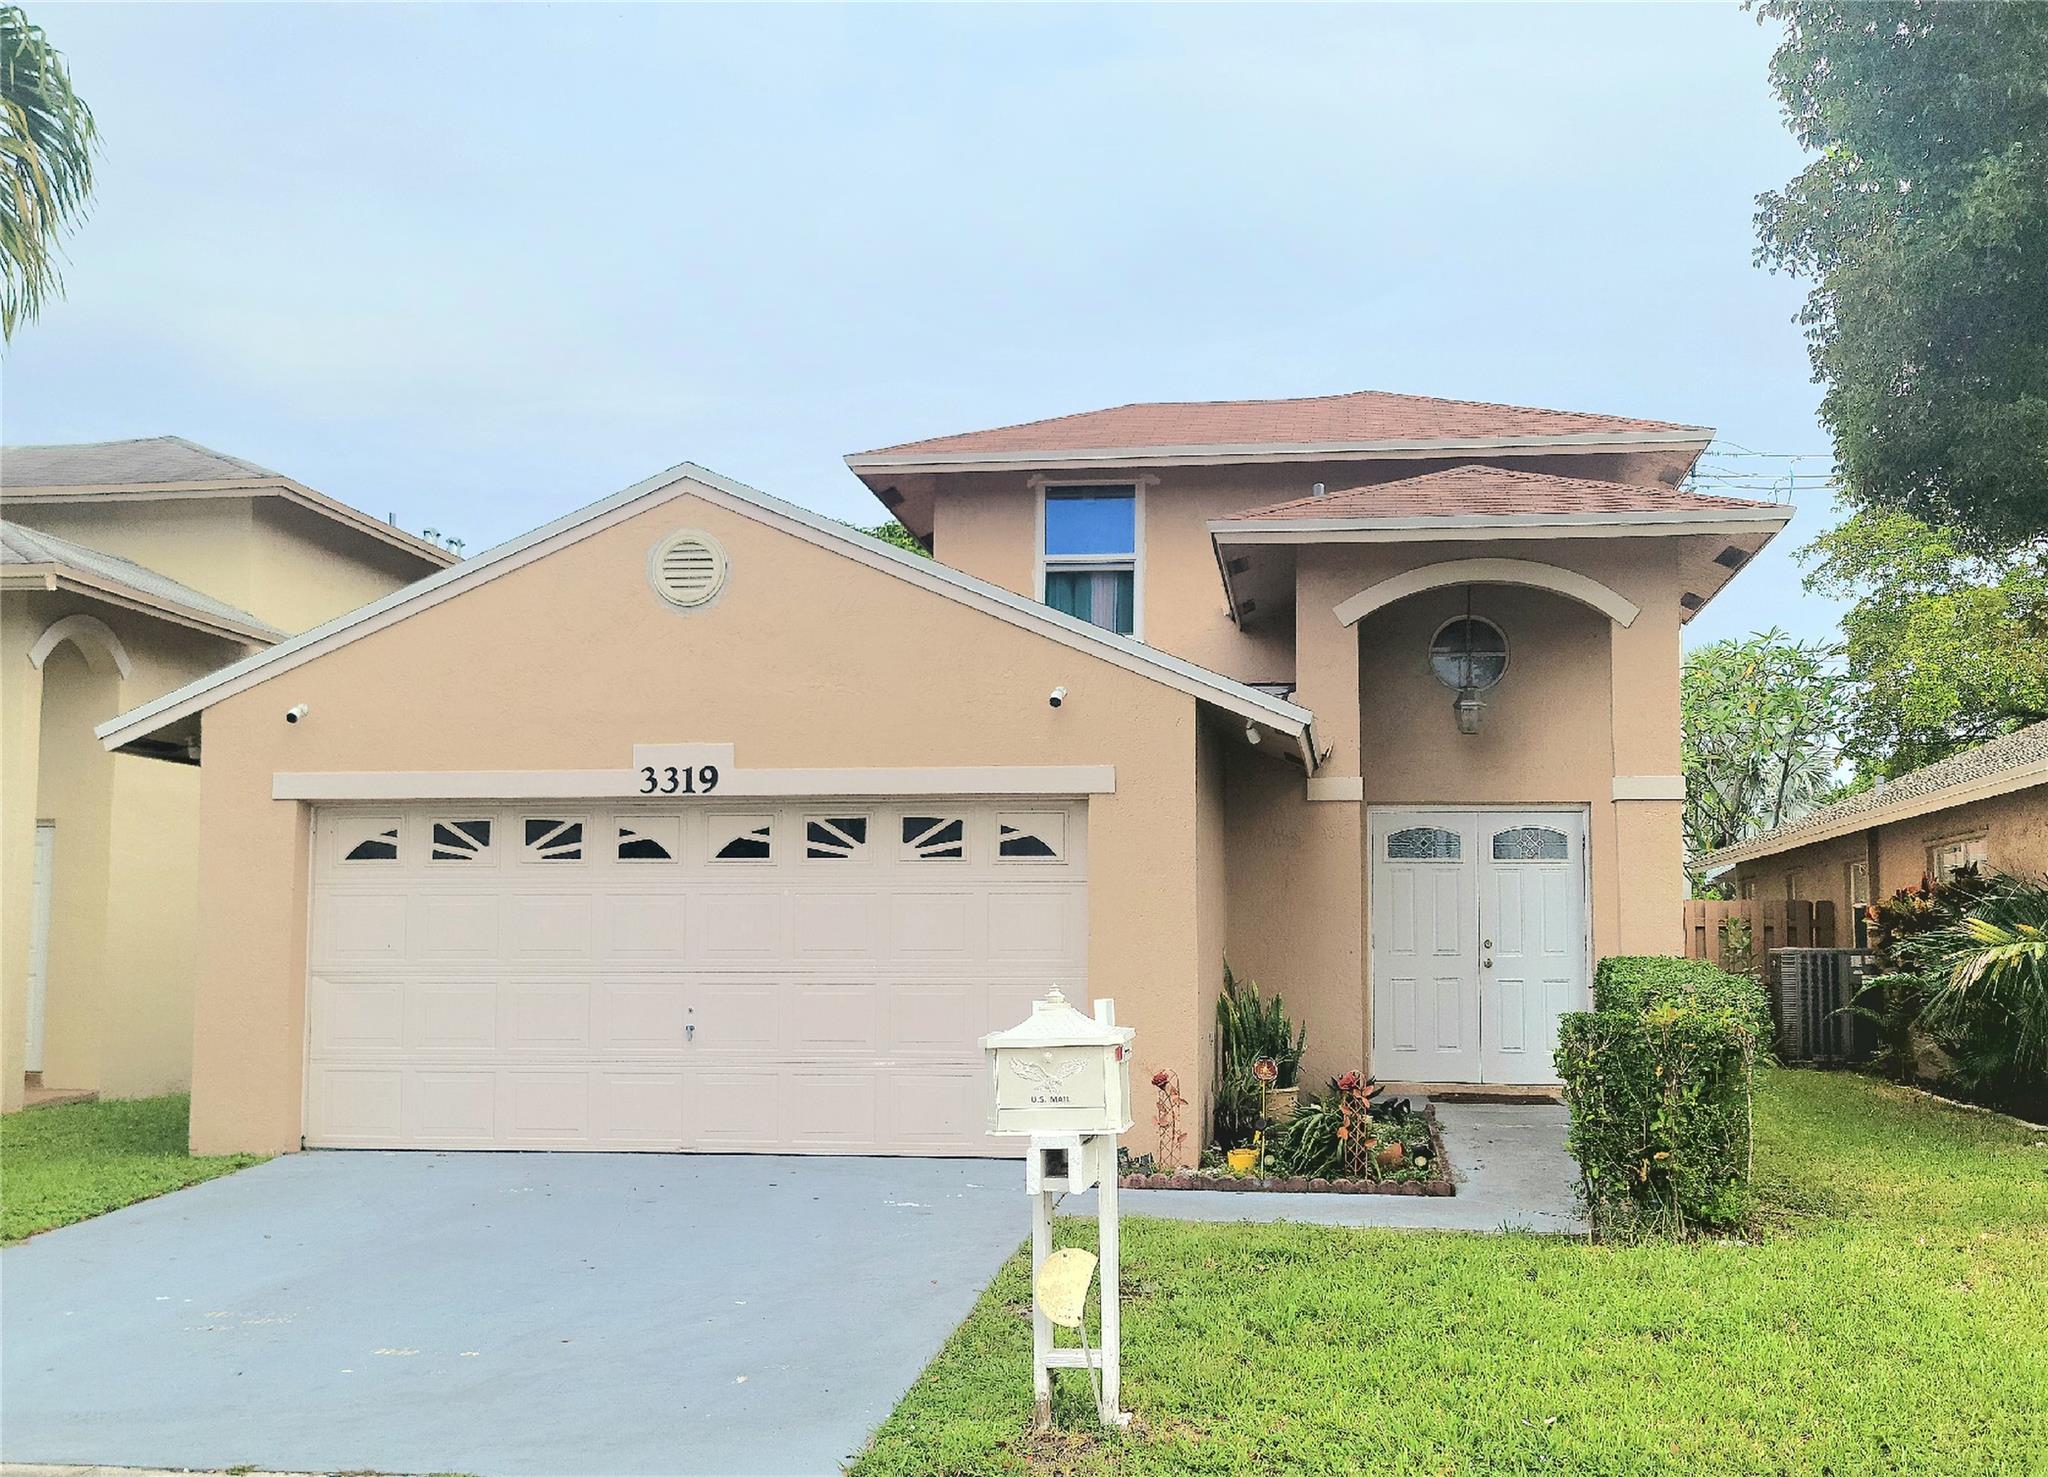 3319 NW 23rd court, Coconut Creek, FL 